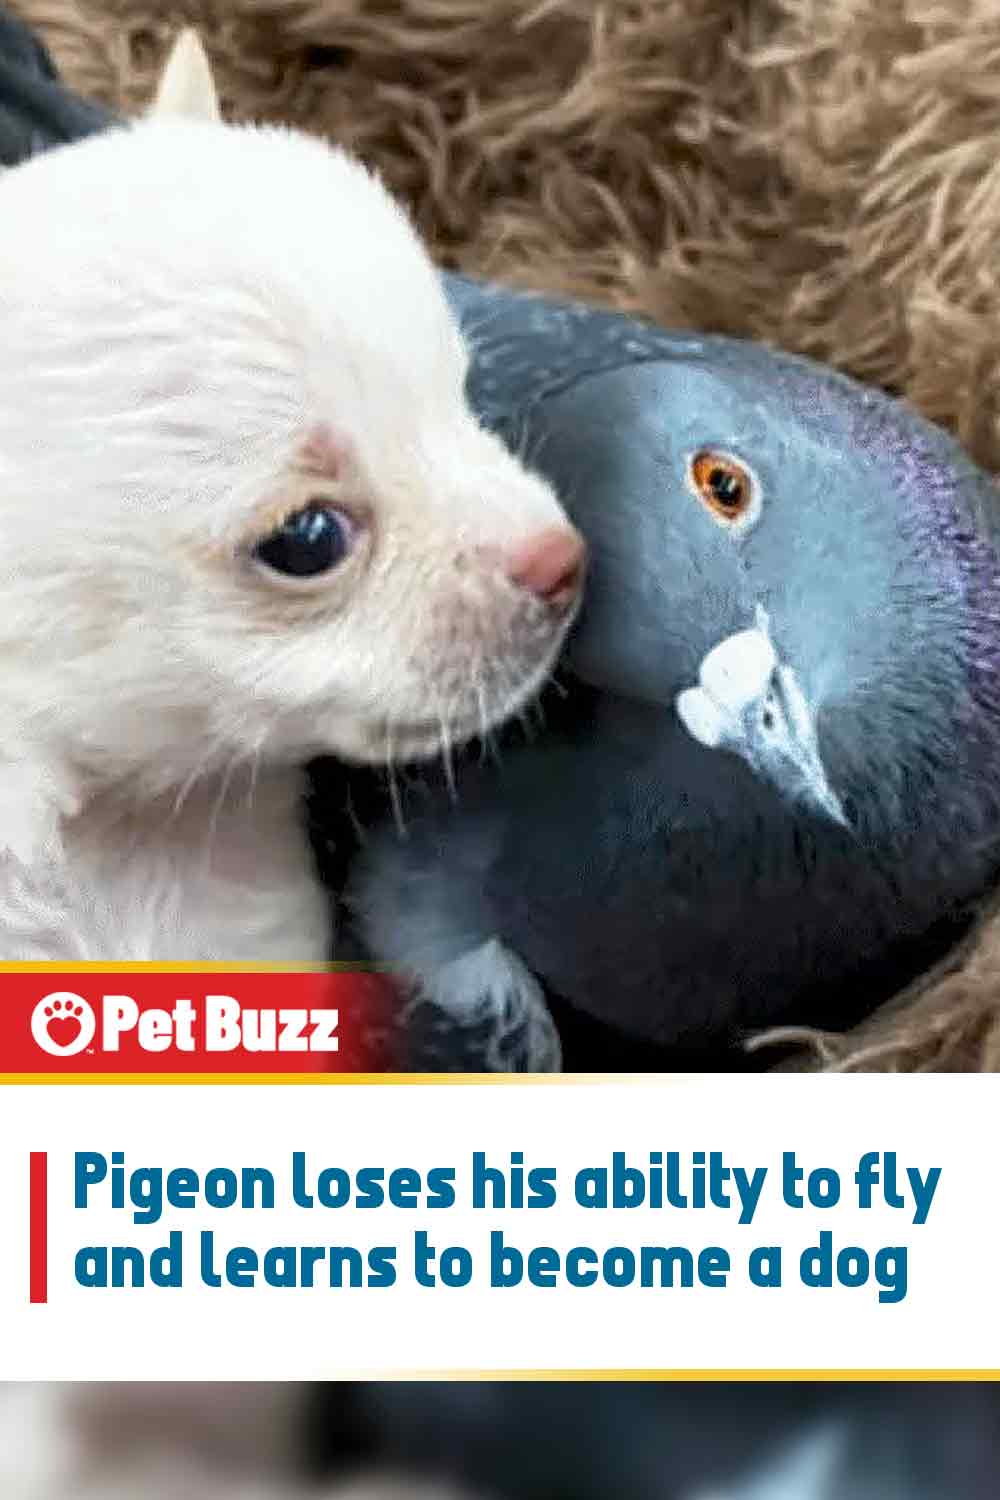 Pigeon loses his ability to fly and learns to become a dog